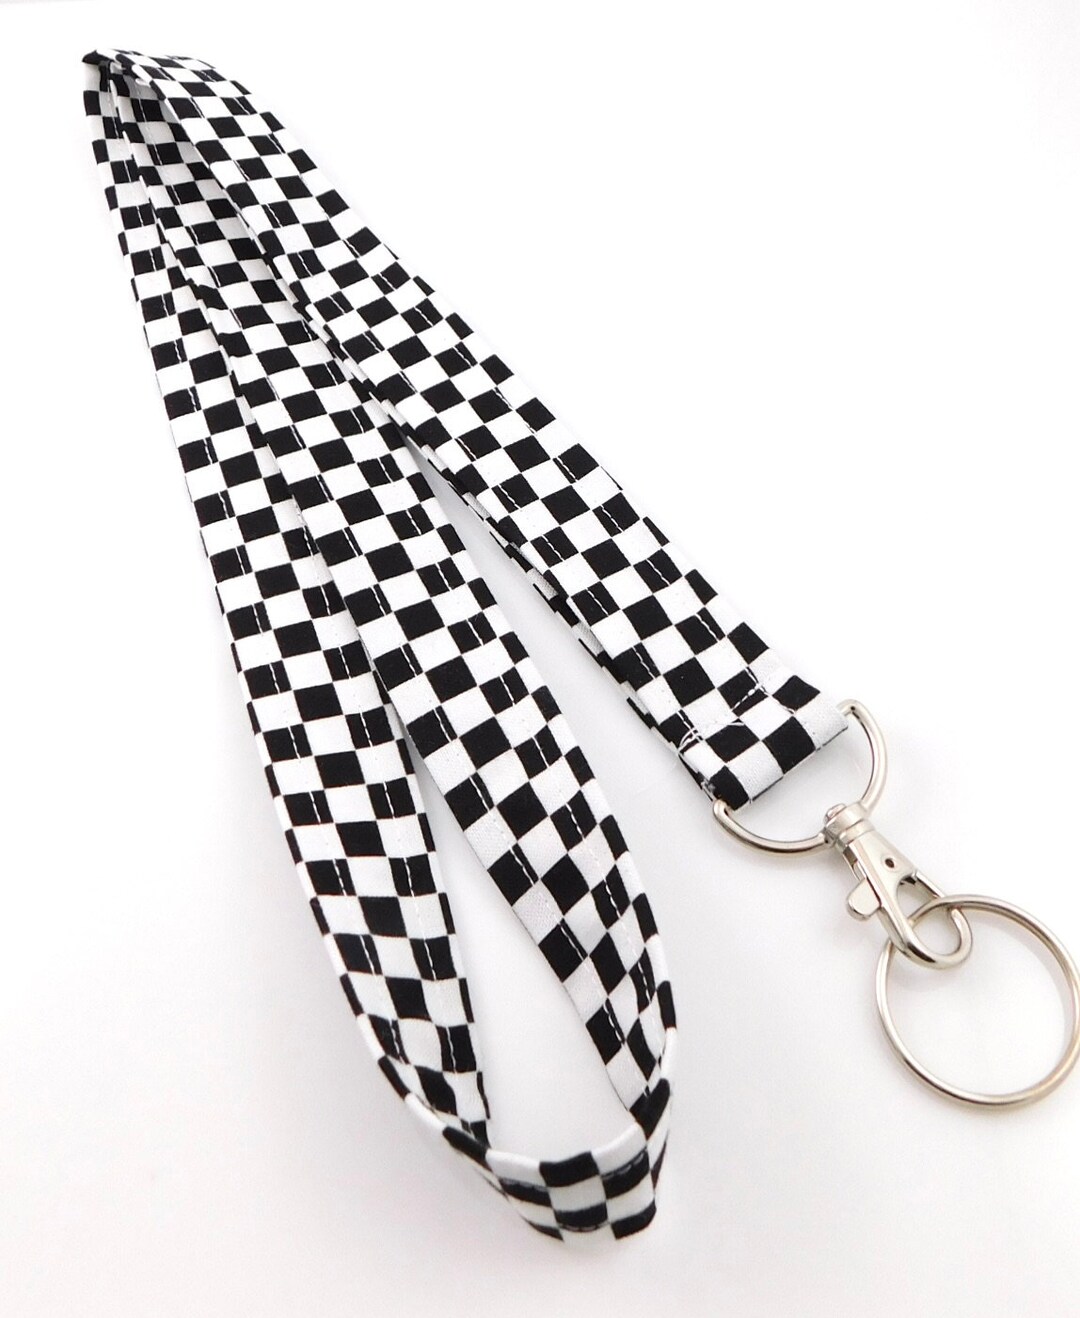 Black White Checkered Football Keychain Bulk Key Chain Gifts Car Bag Horse  Pendant Student Accessories Key Ring Jewelry - AliExpress